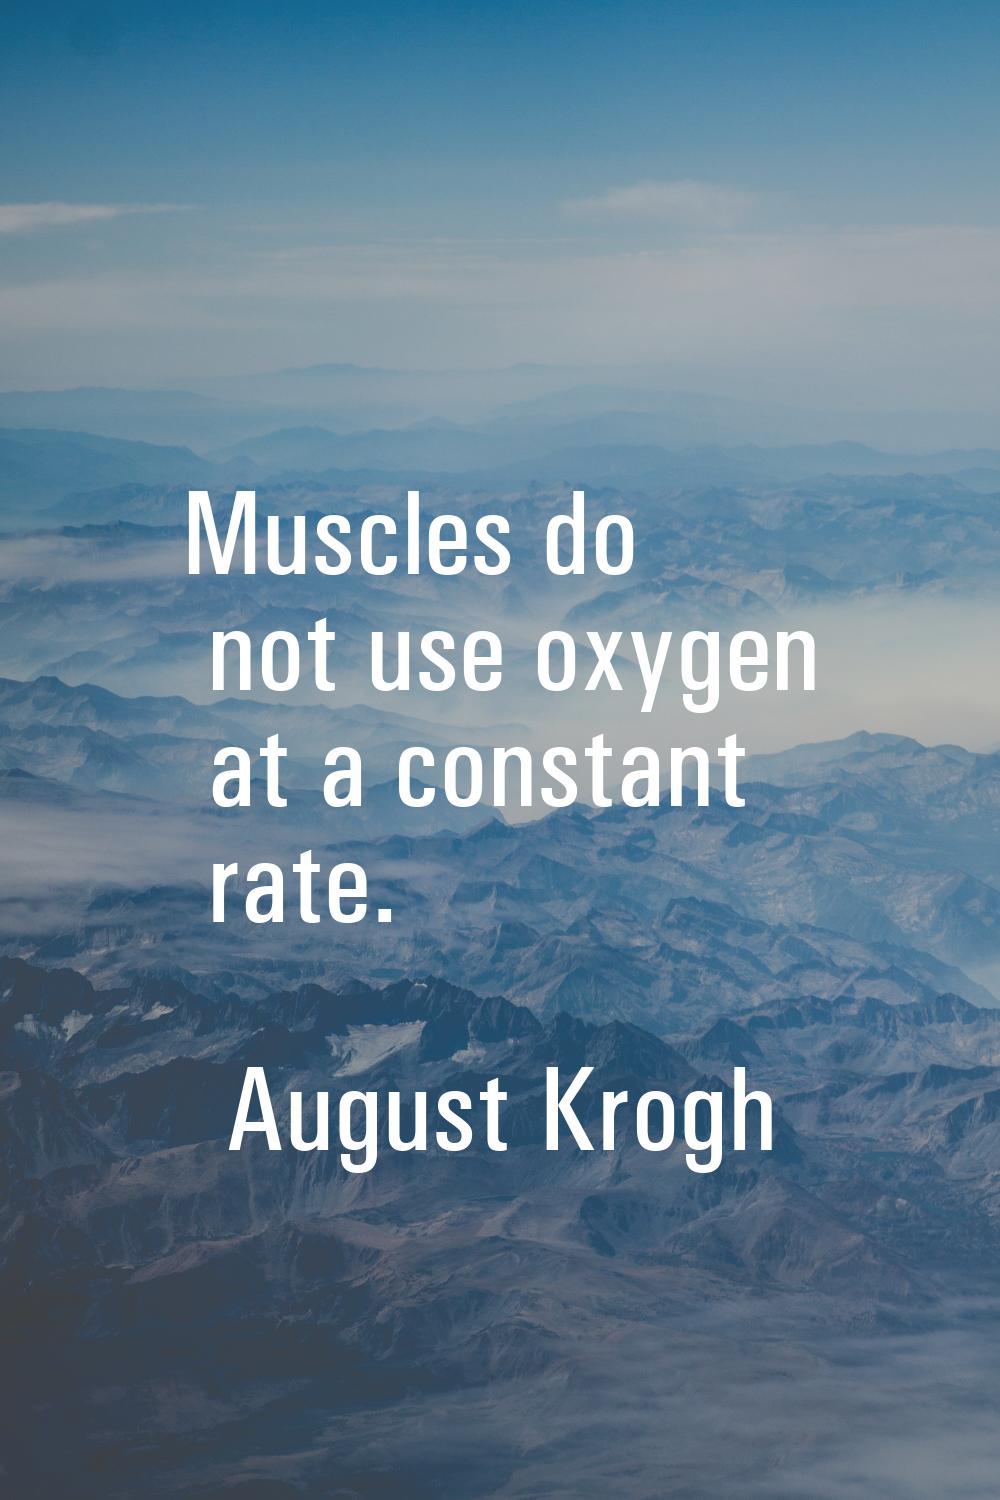 Muscles do not use oxygen at a constant rate.